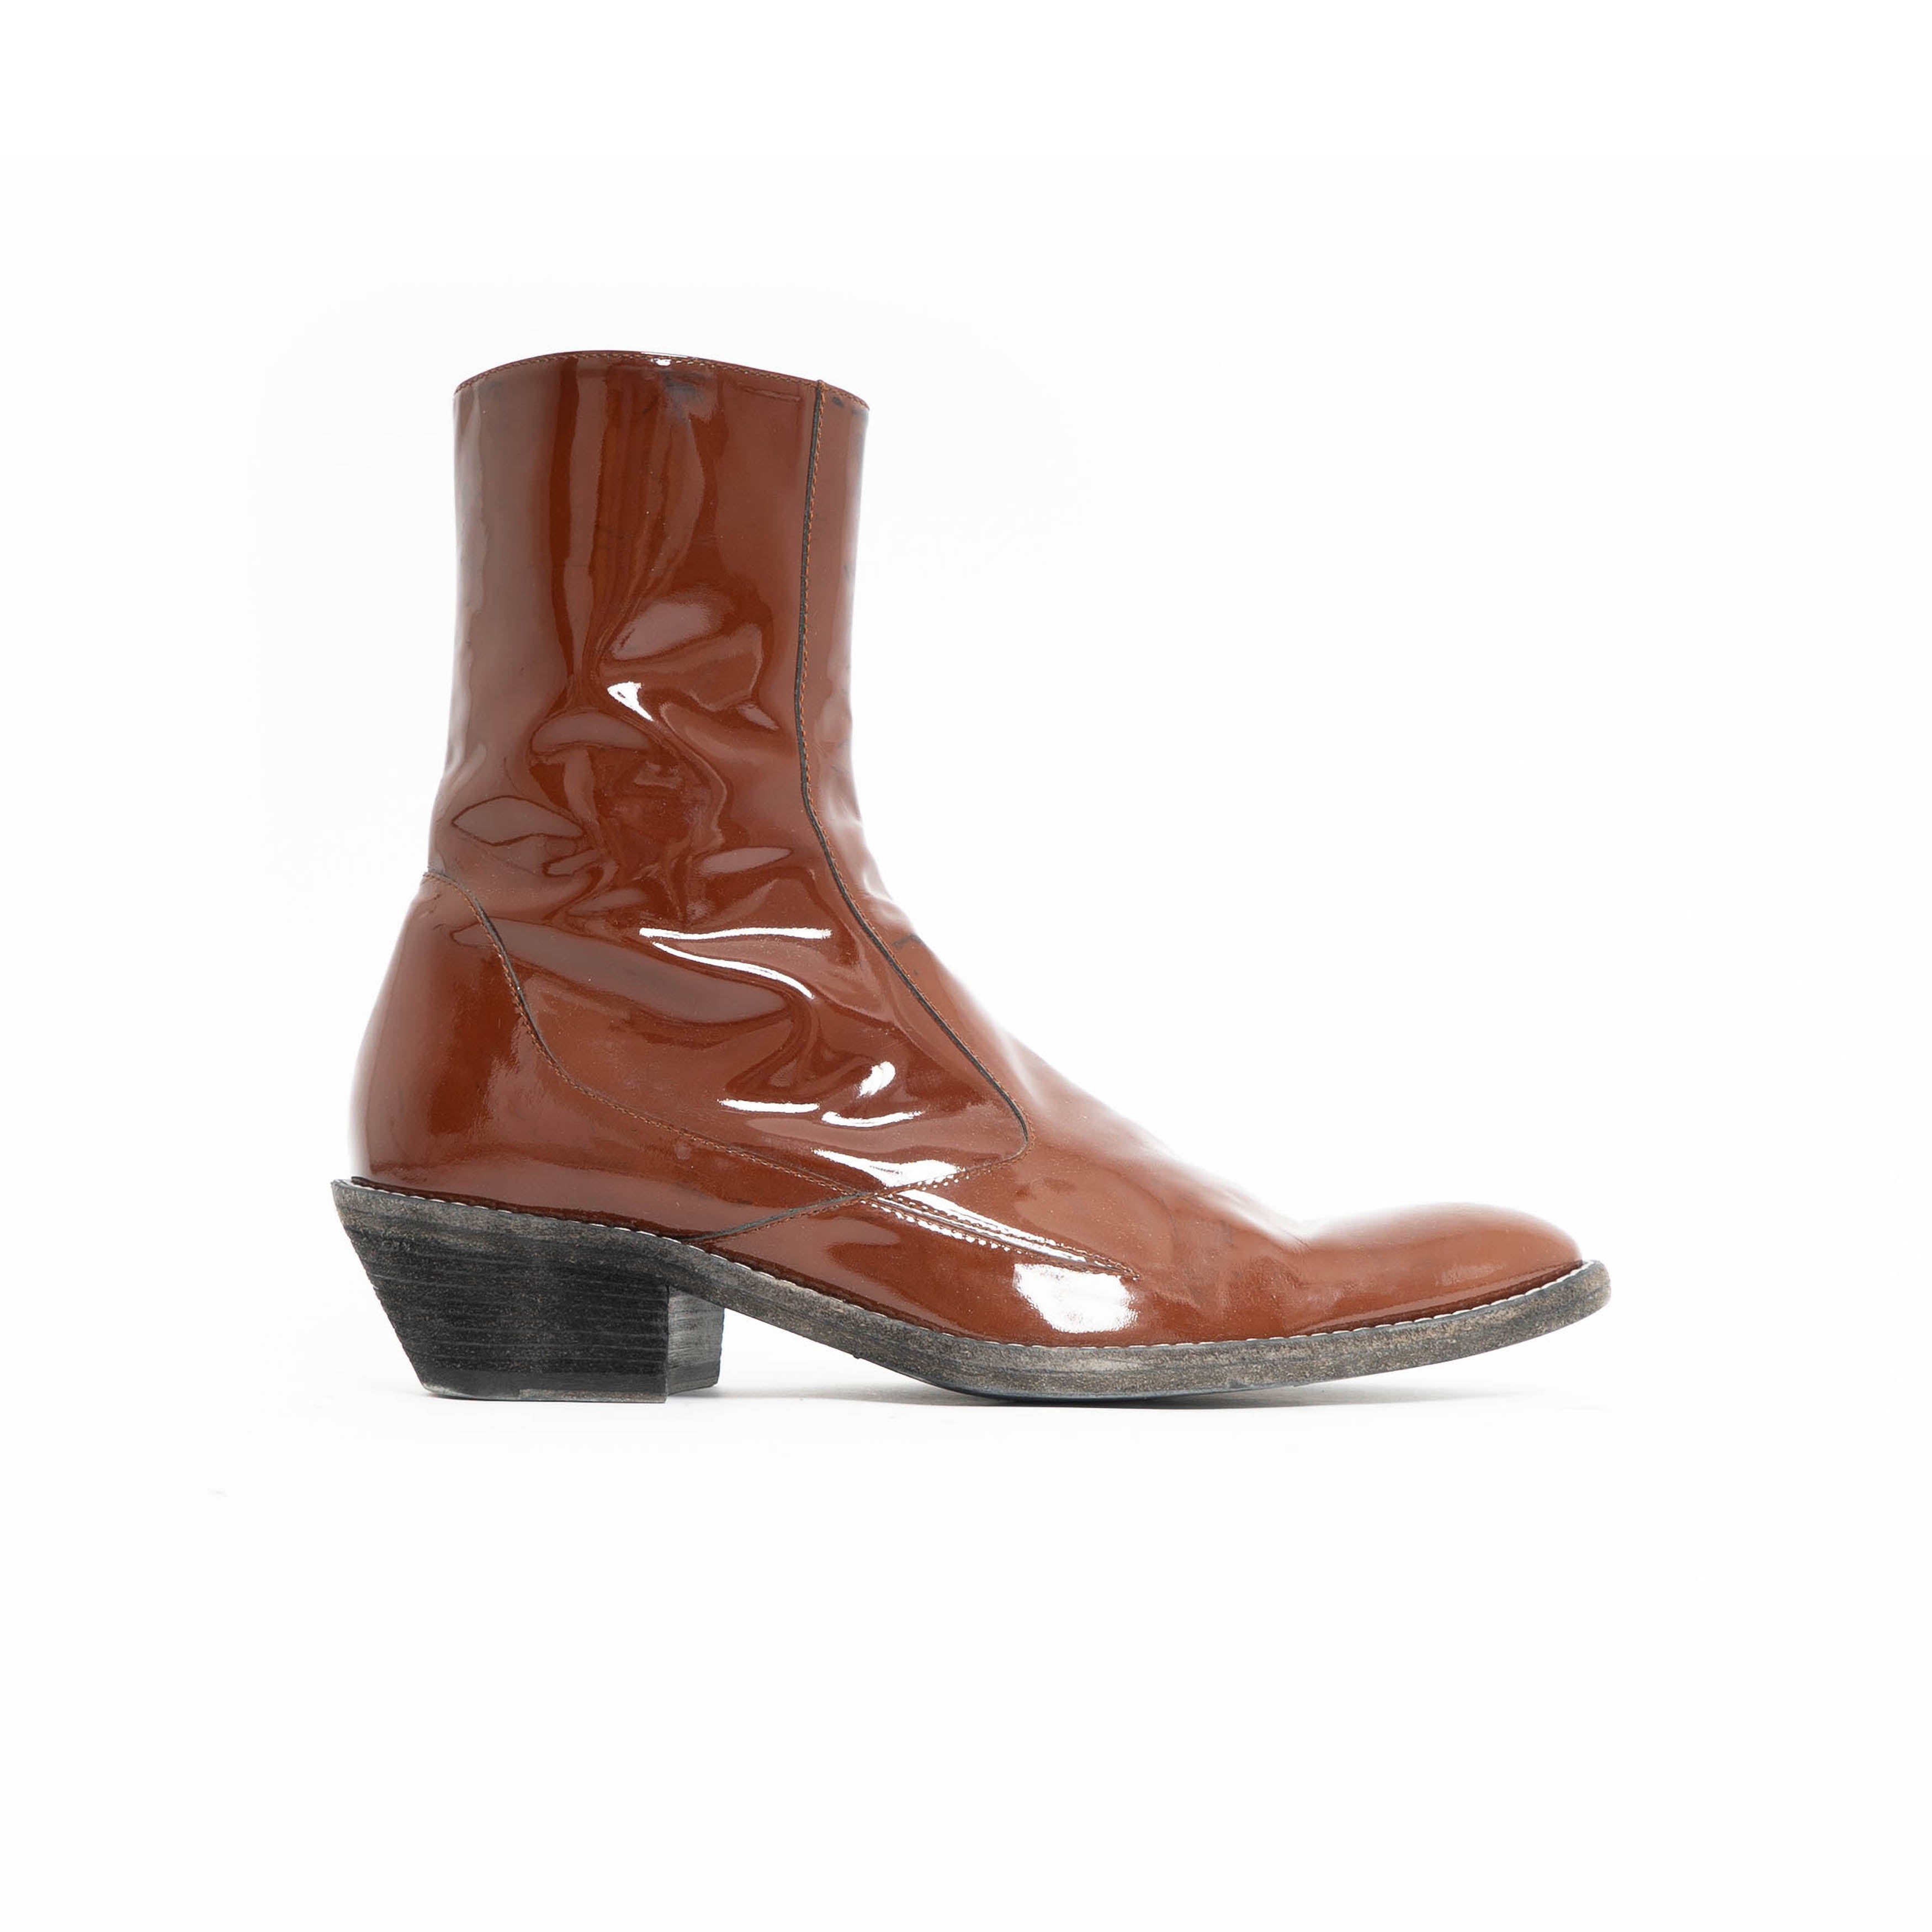 FW19 Brown Patent Leather Western Boots